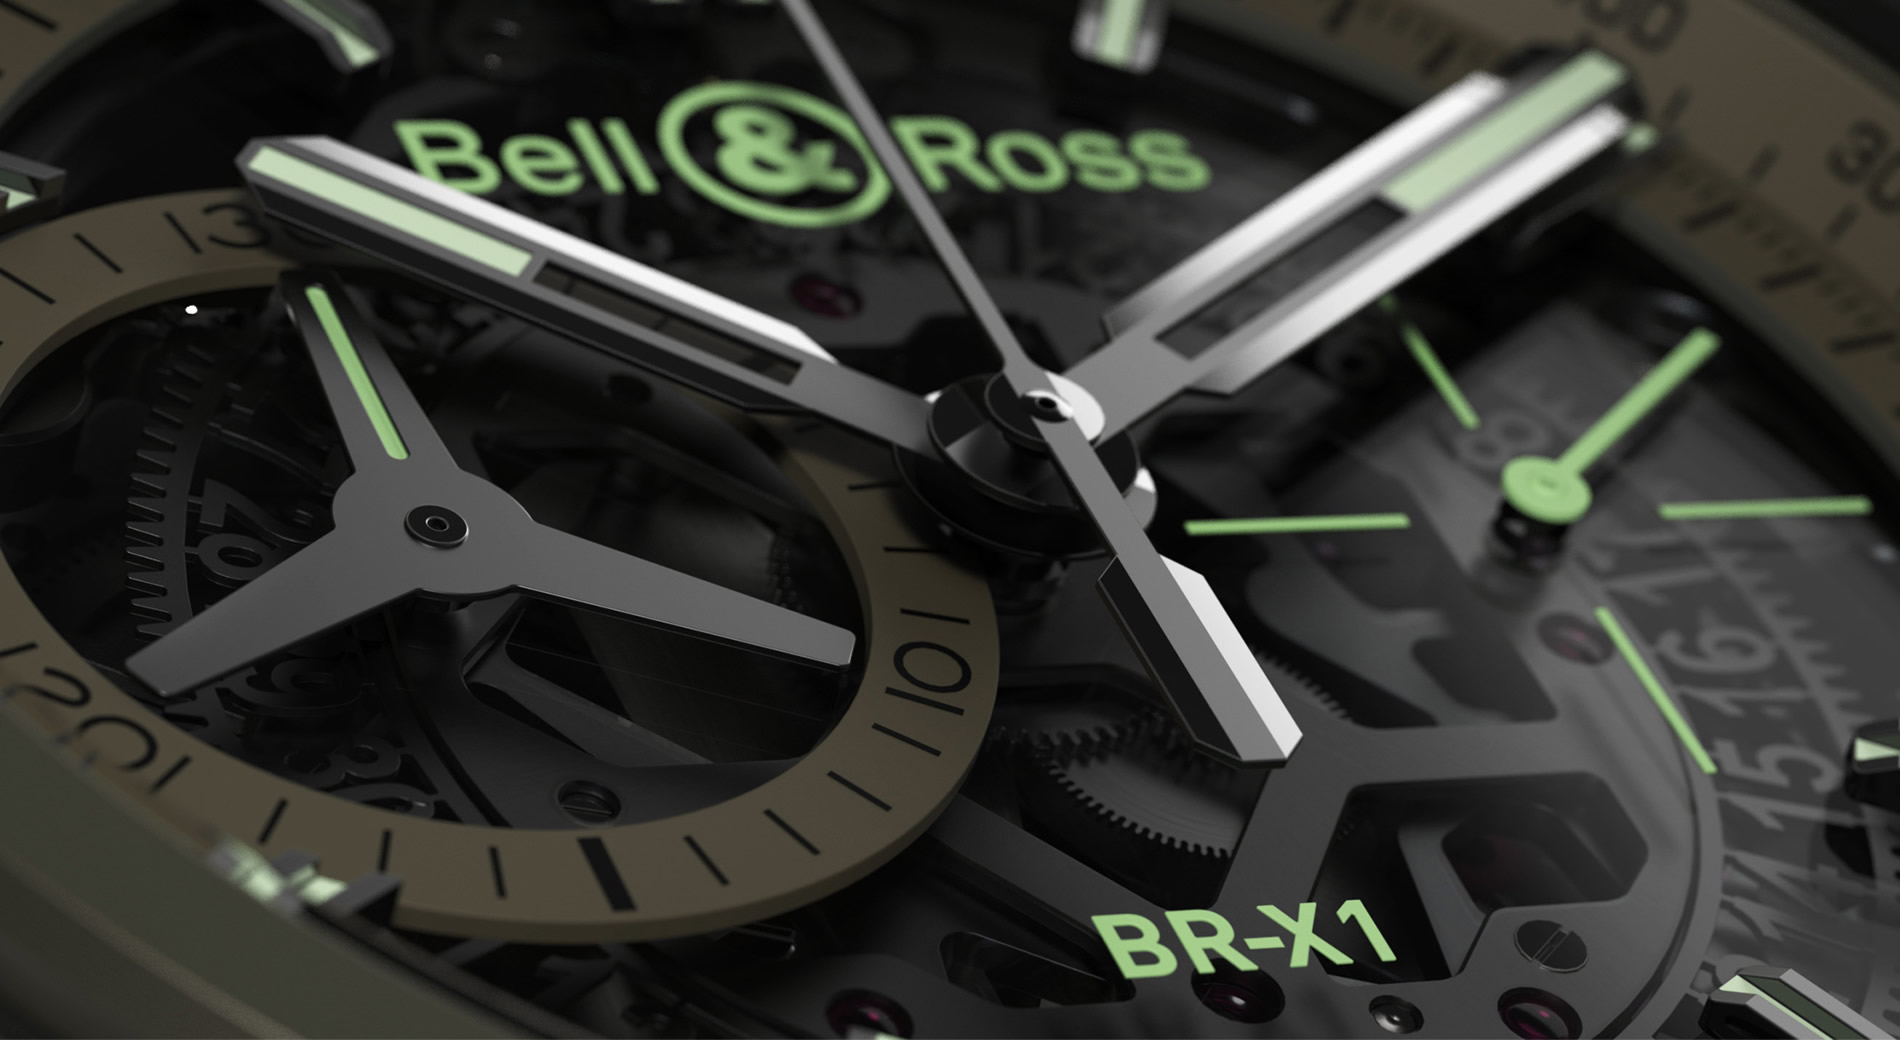 Introducing The Bell & Ross BR-X1 Military